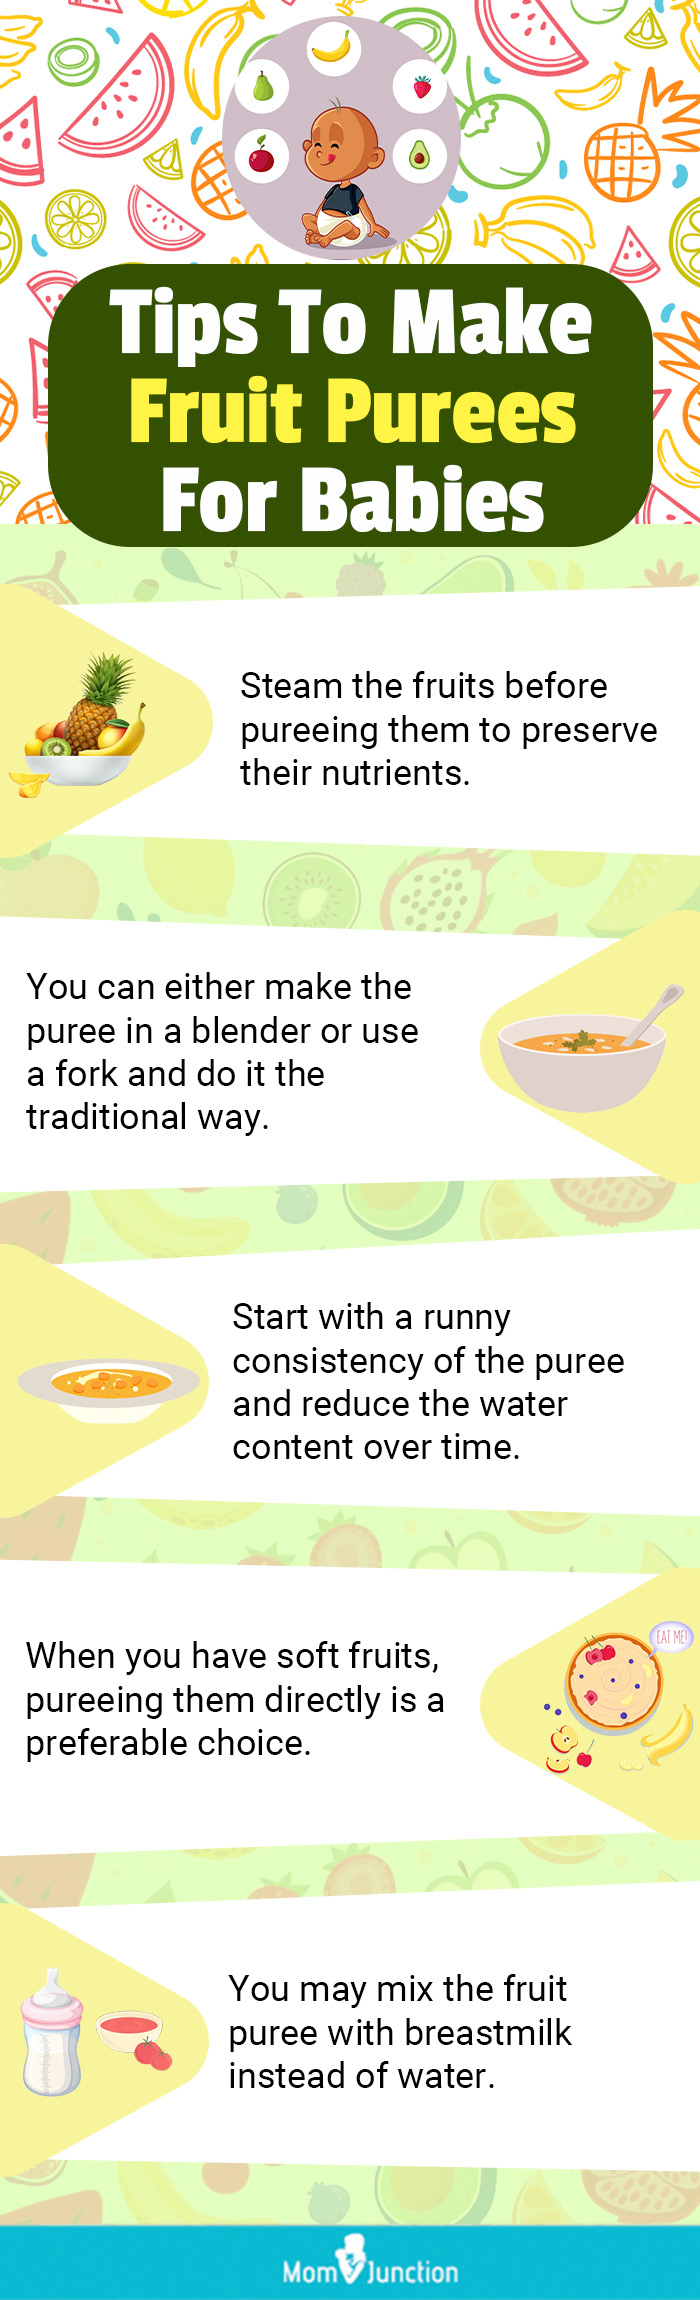 tips to make fruit purees for babies (infographic)